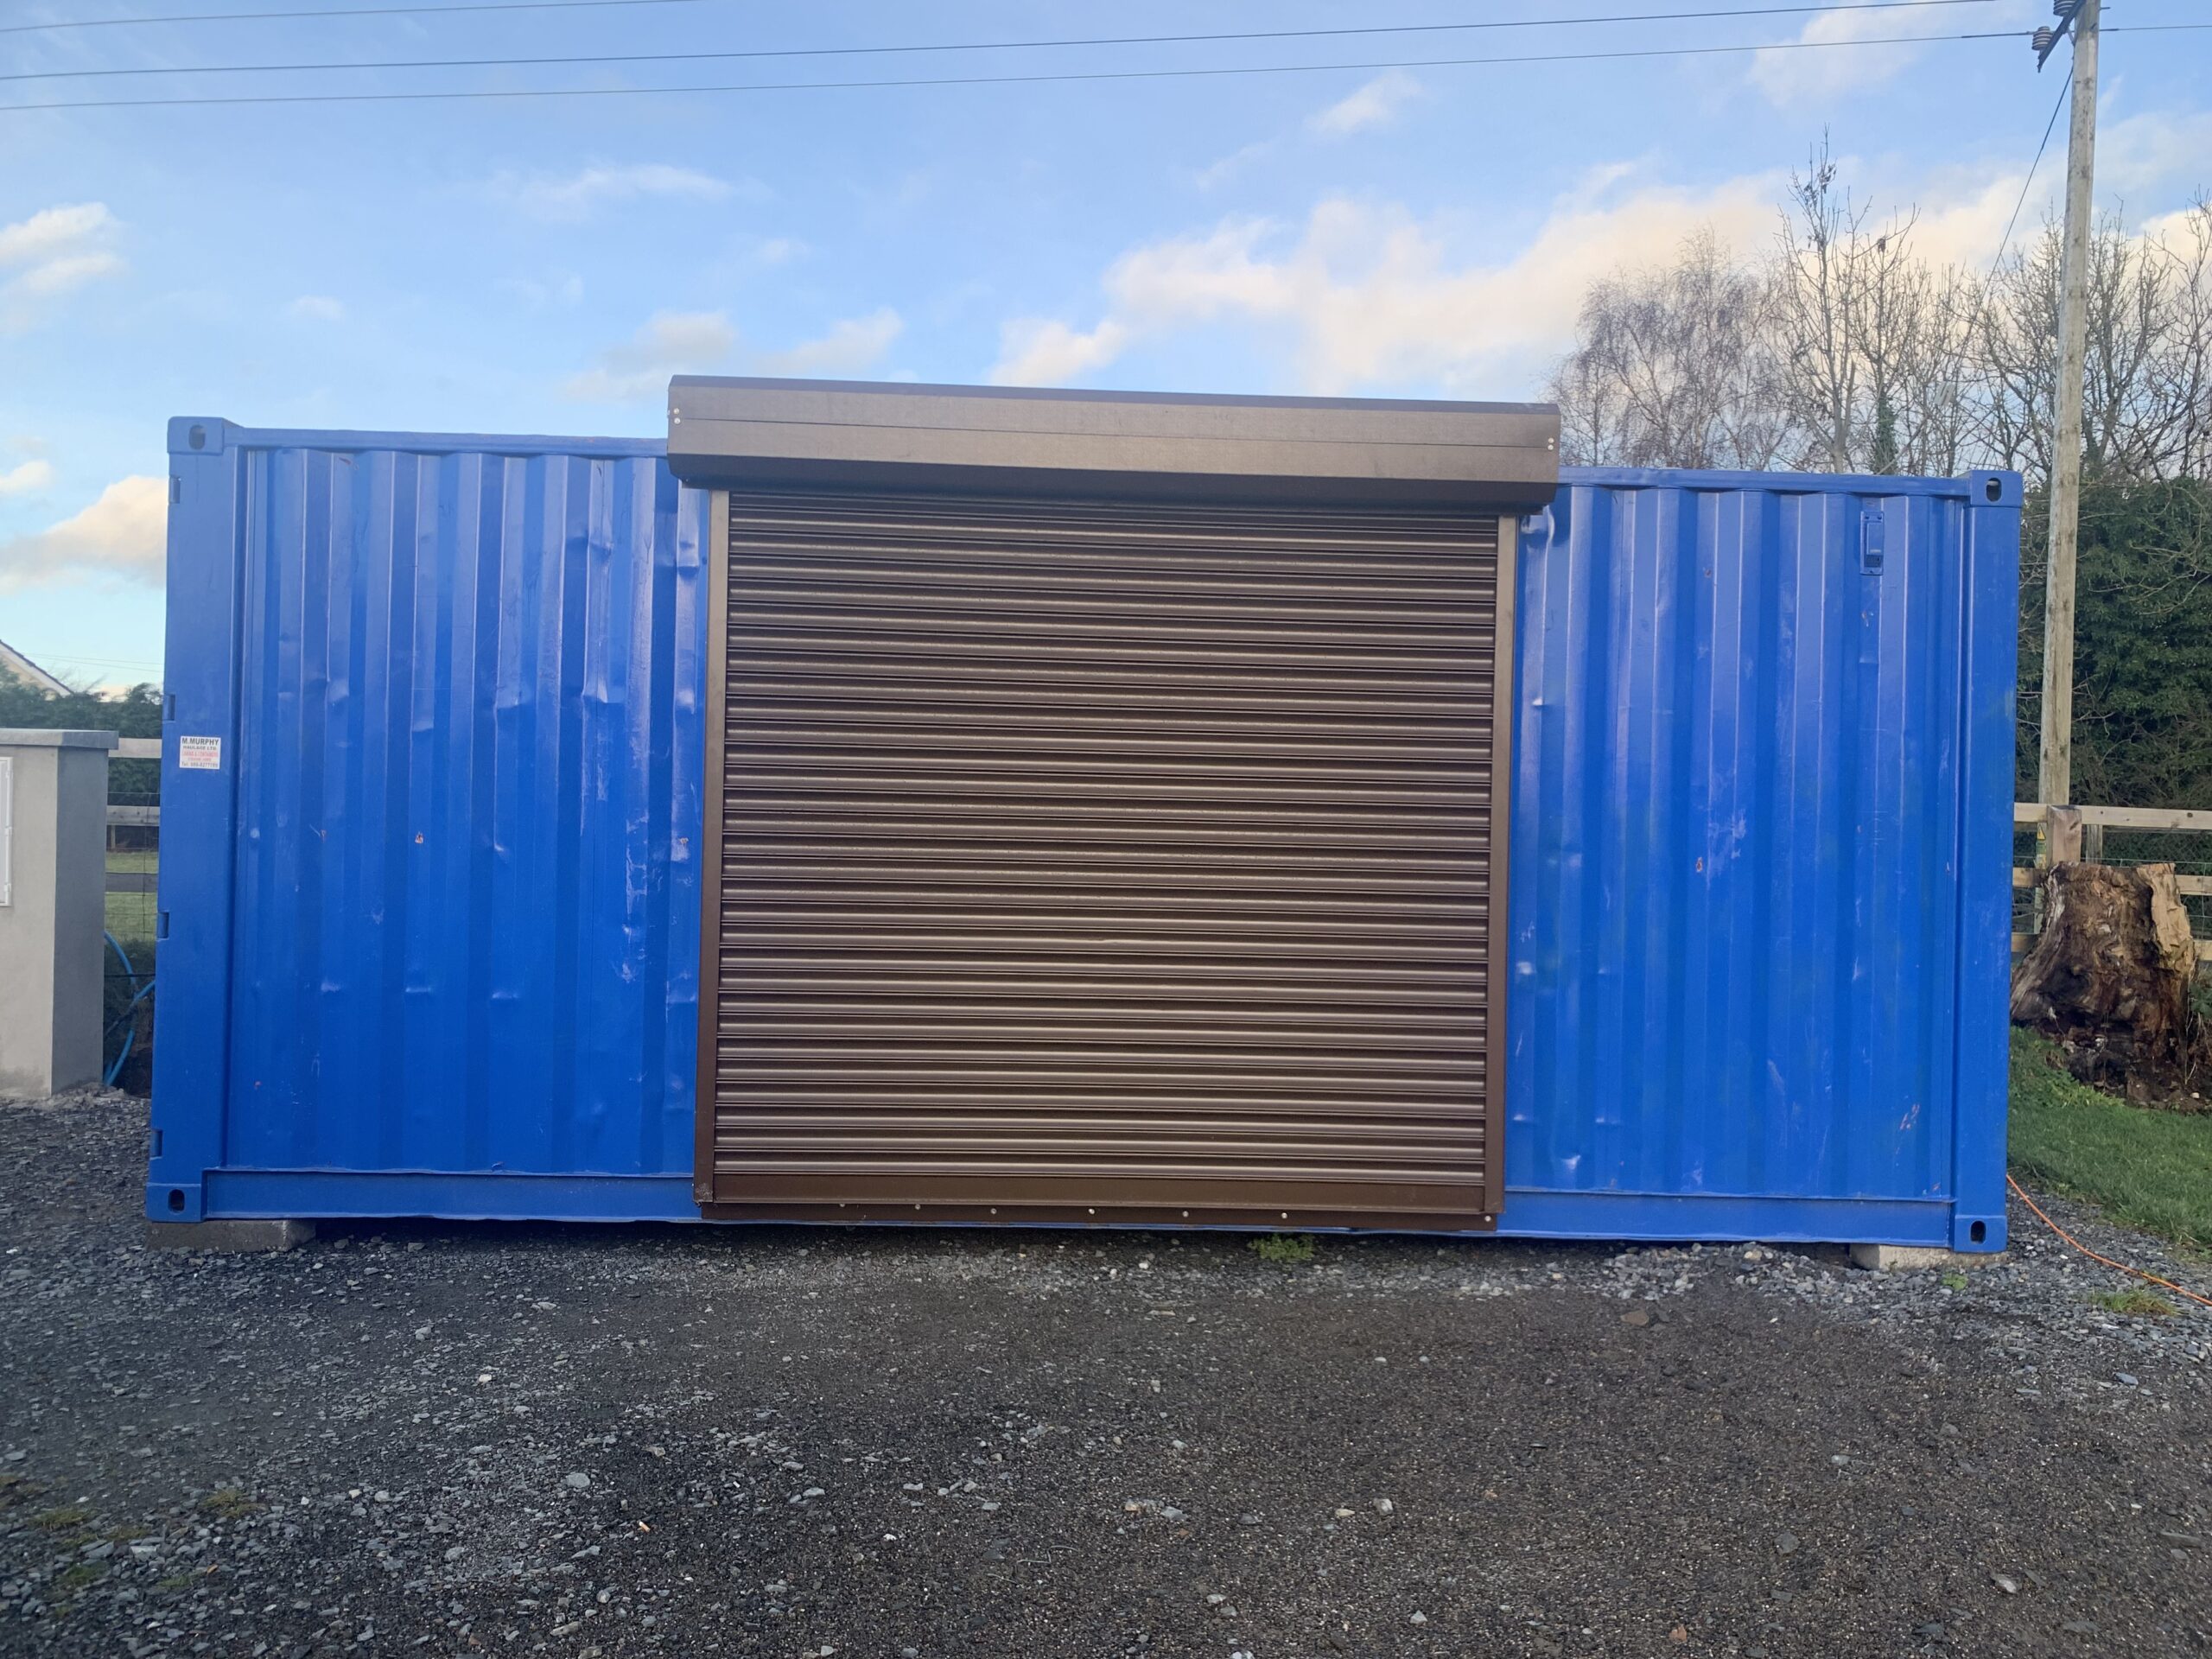 Coffee/Tea Unit fitted with Electric Shutters...thanks to Tom Bealin of Doorfix Ring Gard and Declan and Mick Bealin Junior who worked all morning and afternoon...great work lads...super job.